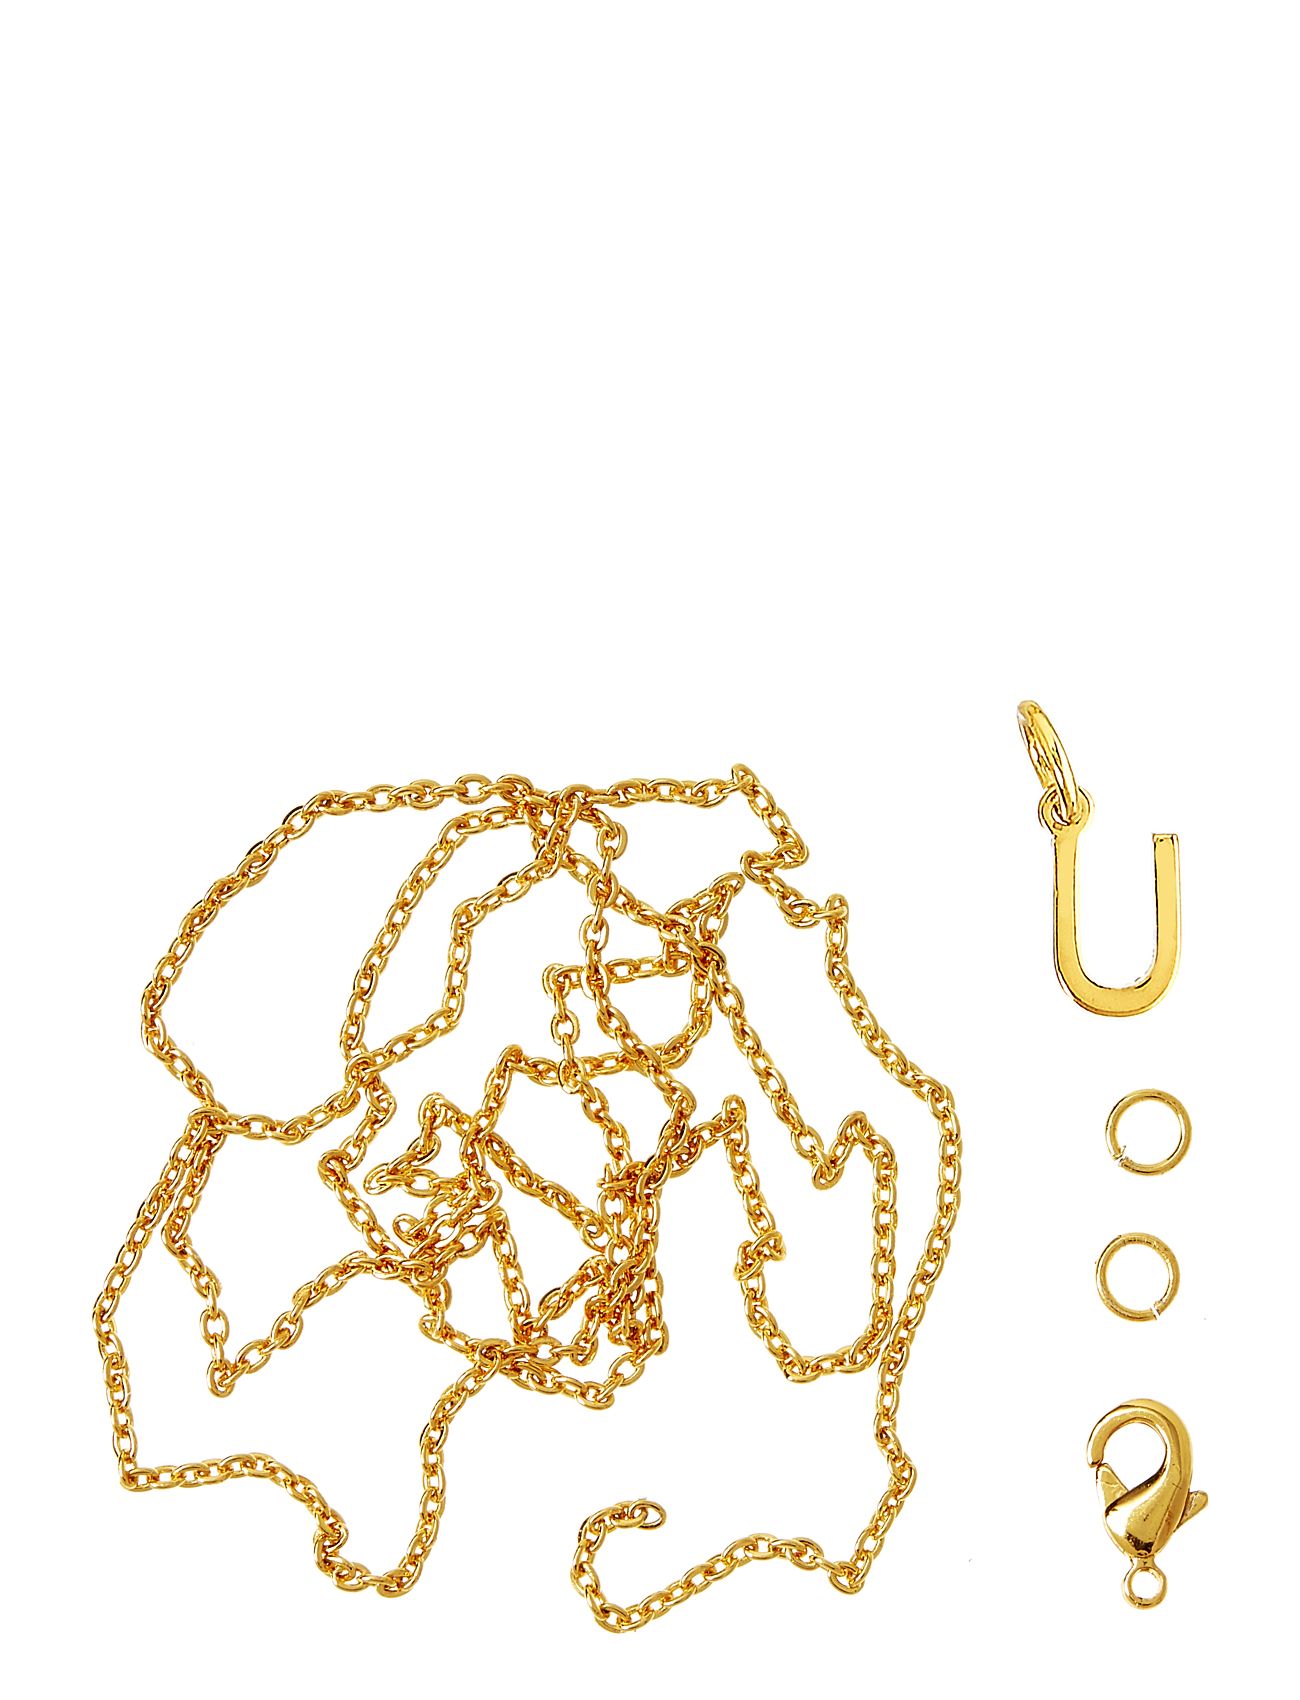 Letter U Gp With O-Ring, Chain And Clasp Toys Creativity Drawing & Crafts Craft Jewellery & Accessories Gold Me & My Box